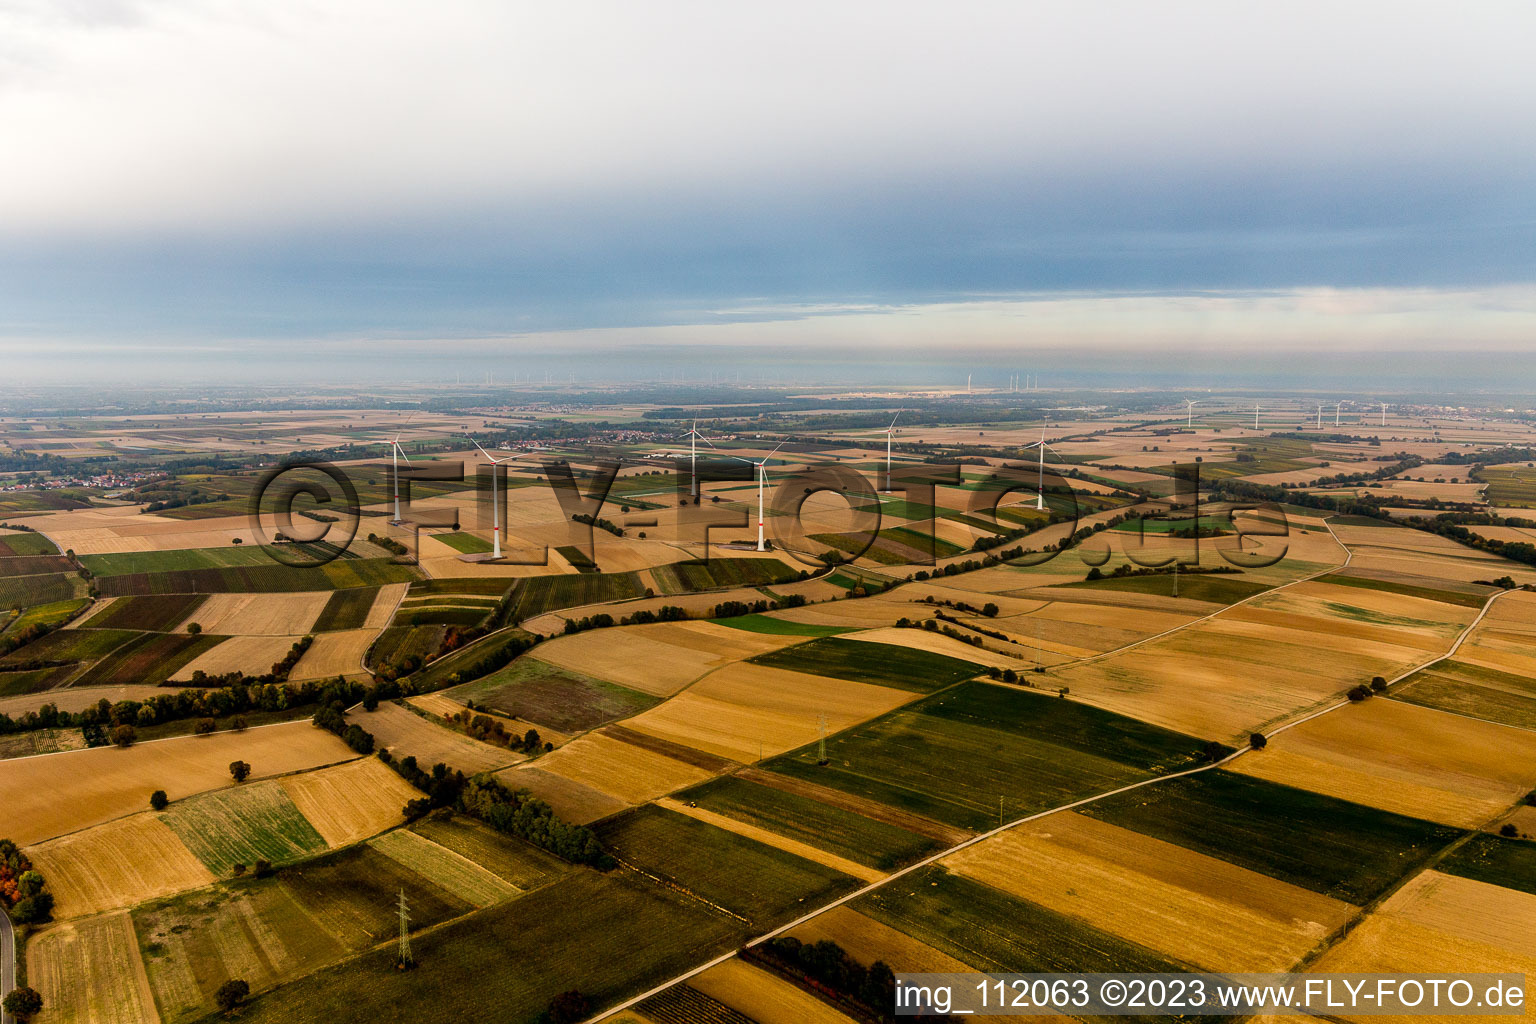 EnBW wind farm - wind turbine with 6 wind turbines in Freckenfeld in the state Rhineland-Palatinate, Germany from above